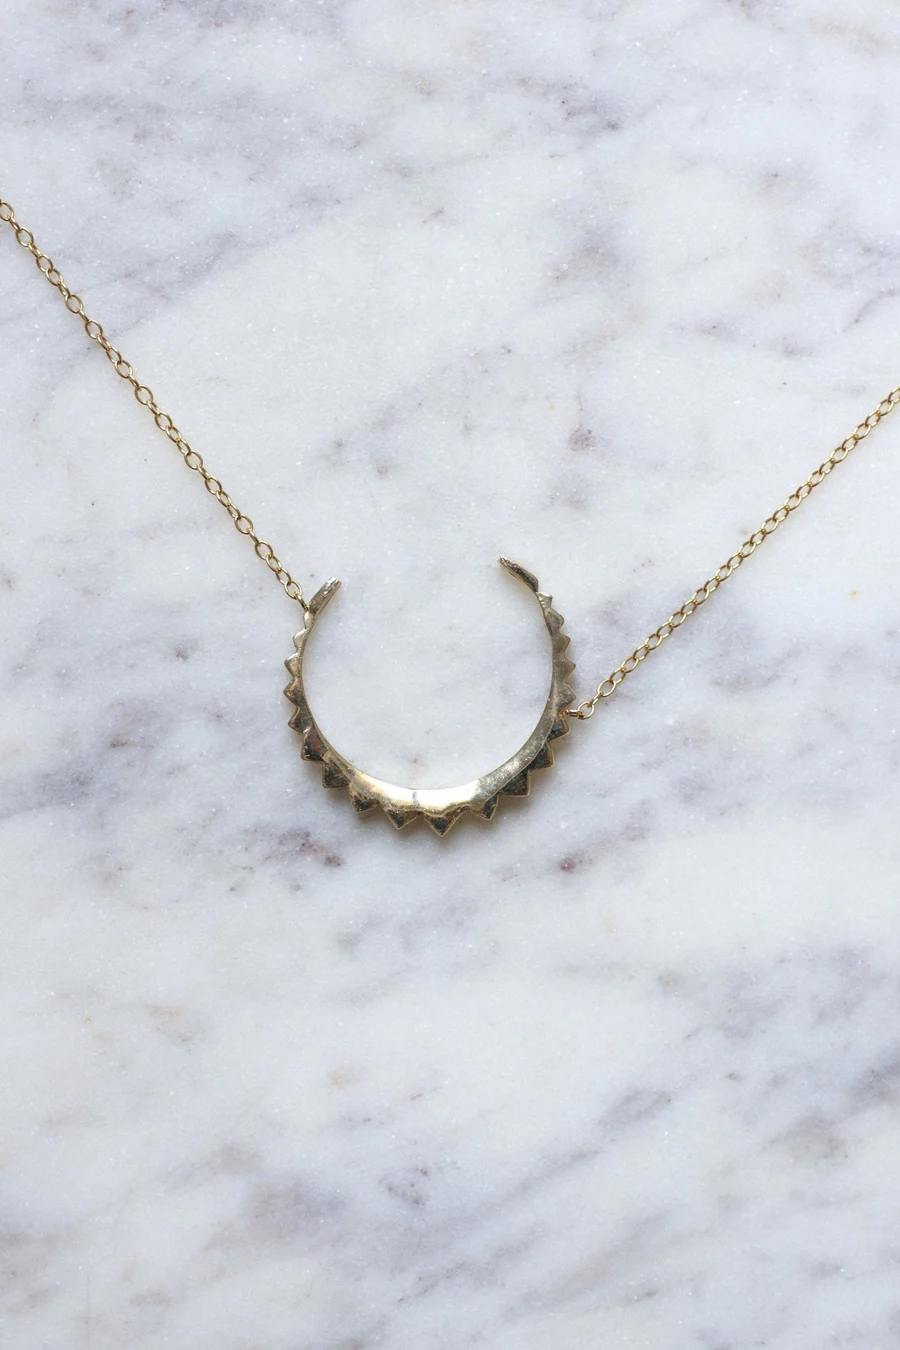 Antique gold and pearl crescent moon necklace - Penelope Gallery